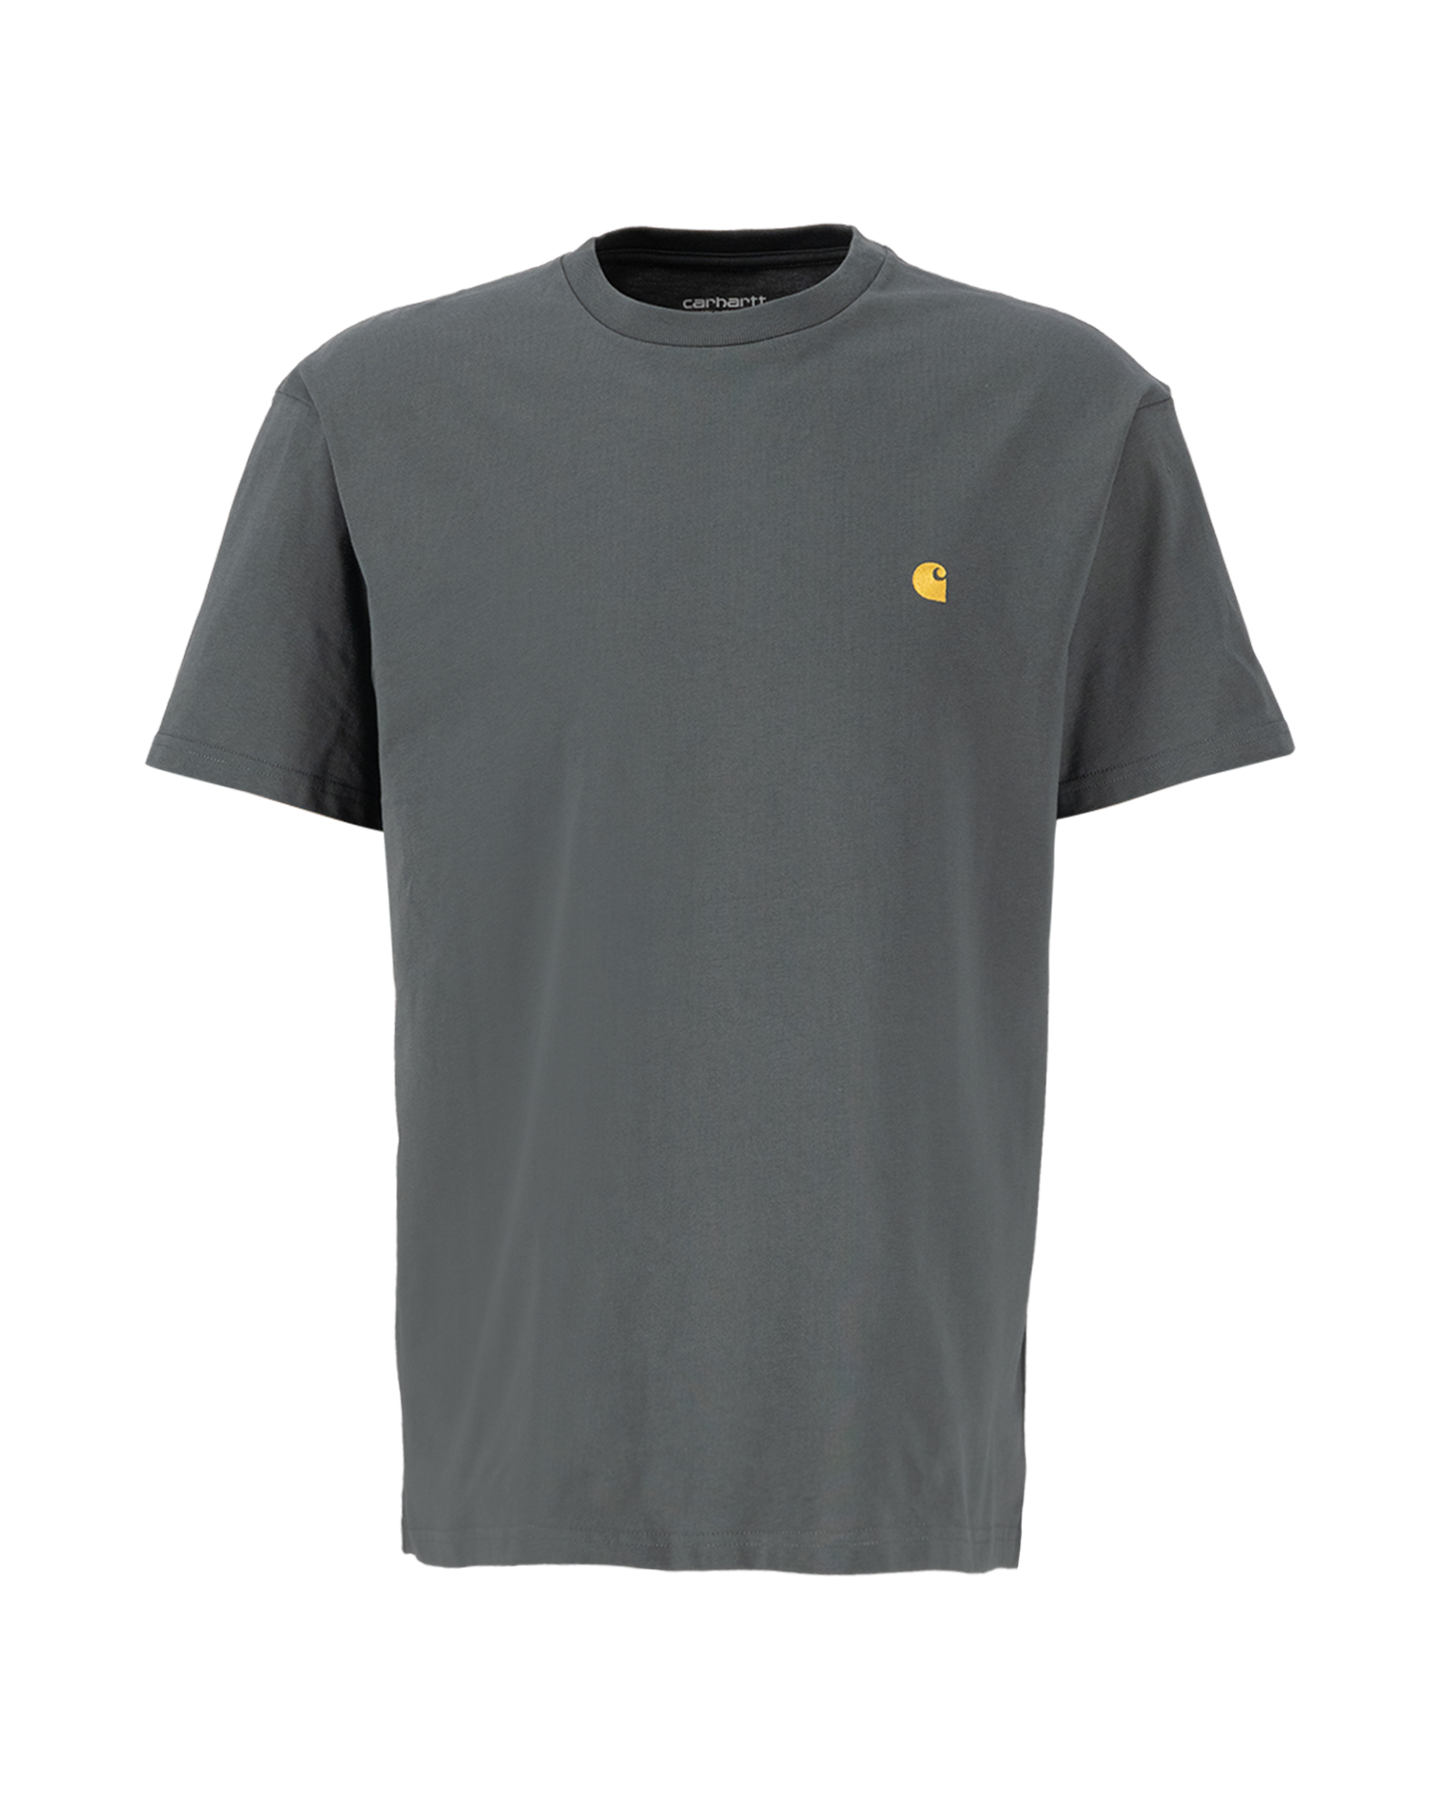 Carhartt WIP S/S Chase T-Shirt Grey 1